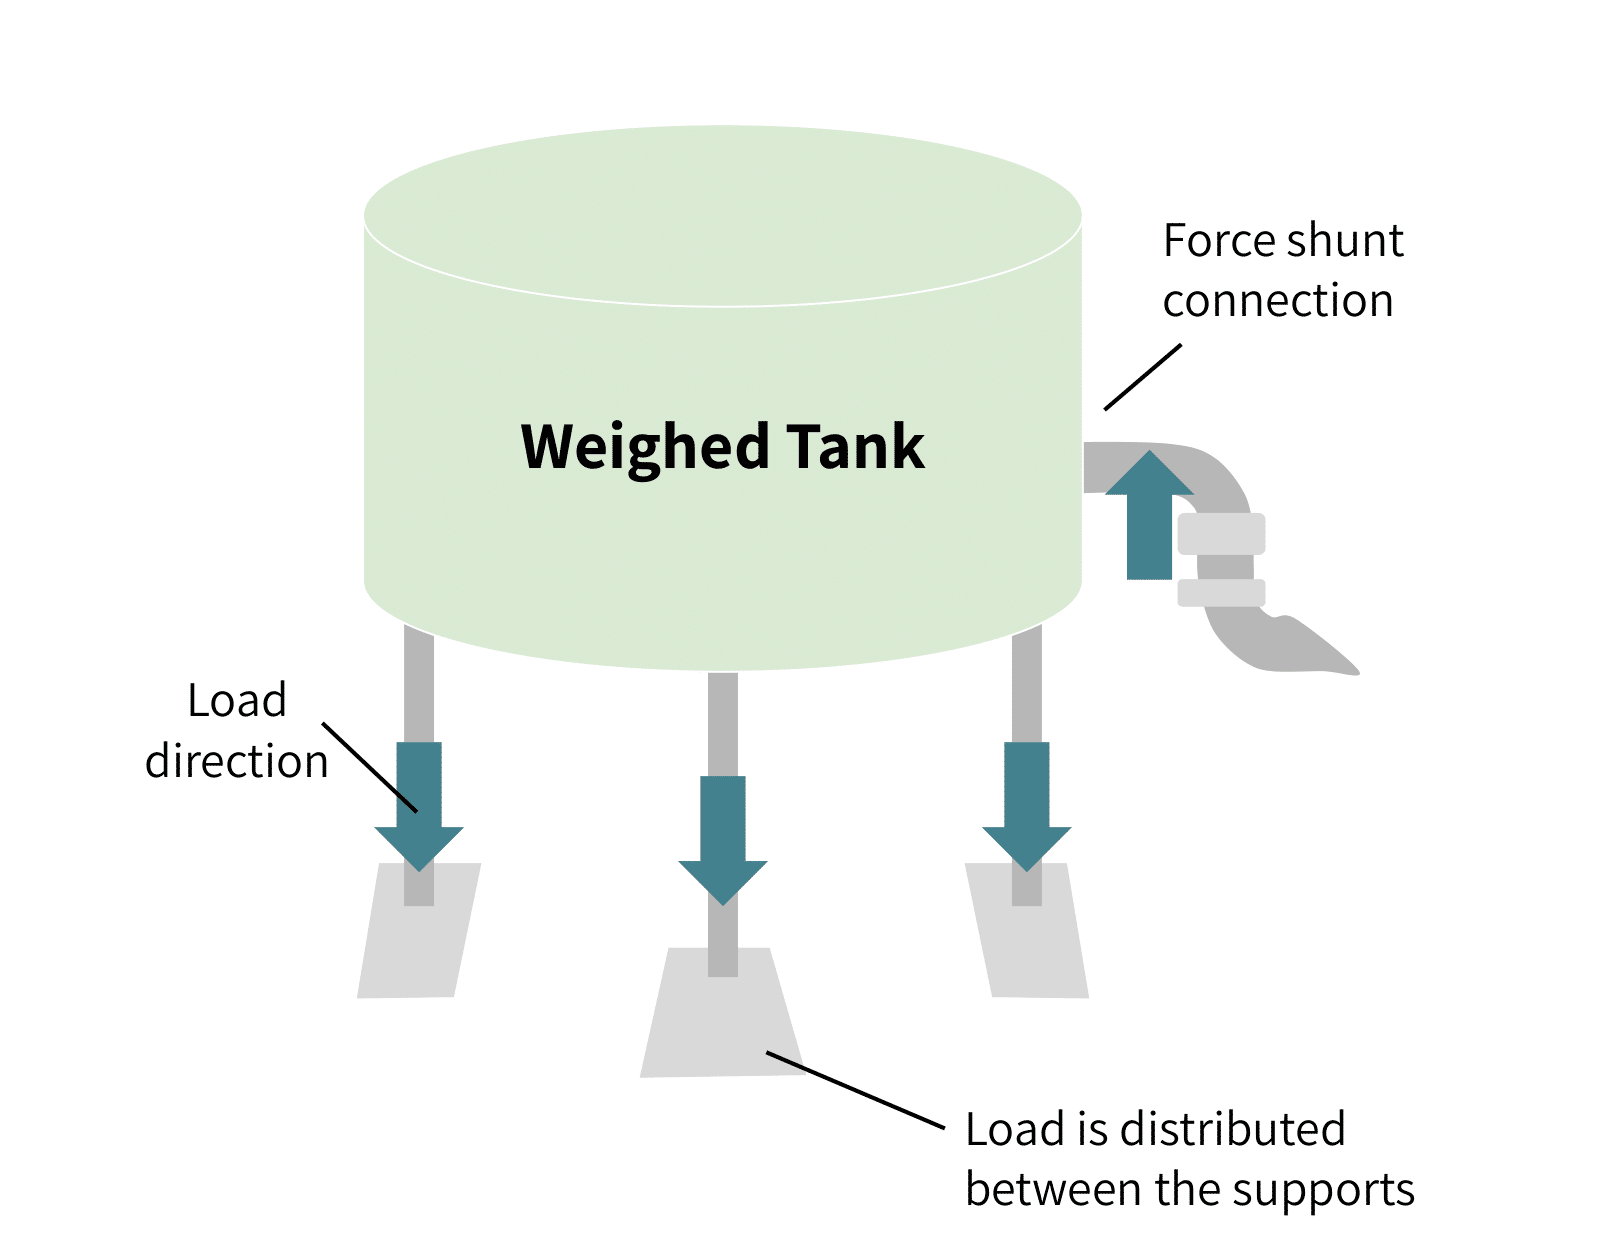 a tank weighing system with force shunts shown